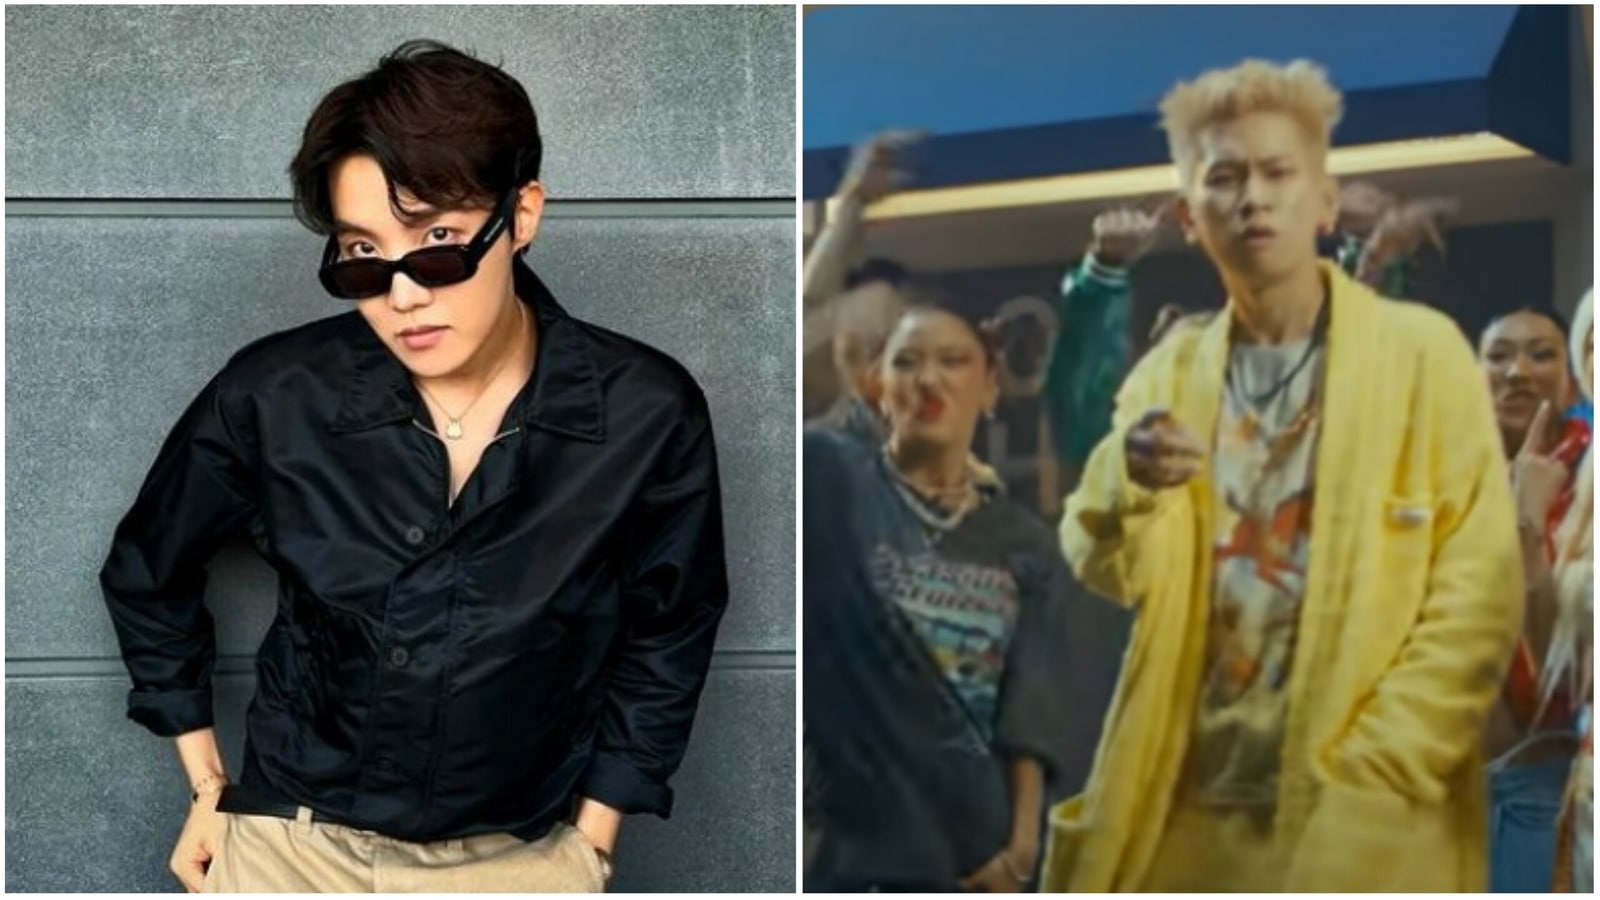 BTS Fashion Style 2022: Here Are J-Hope's 'Rush Hour' Outfits & Accessories